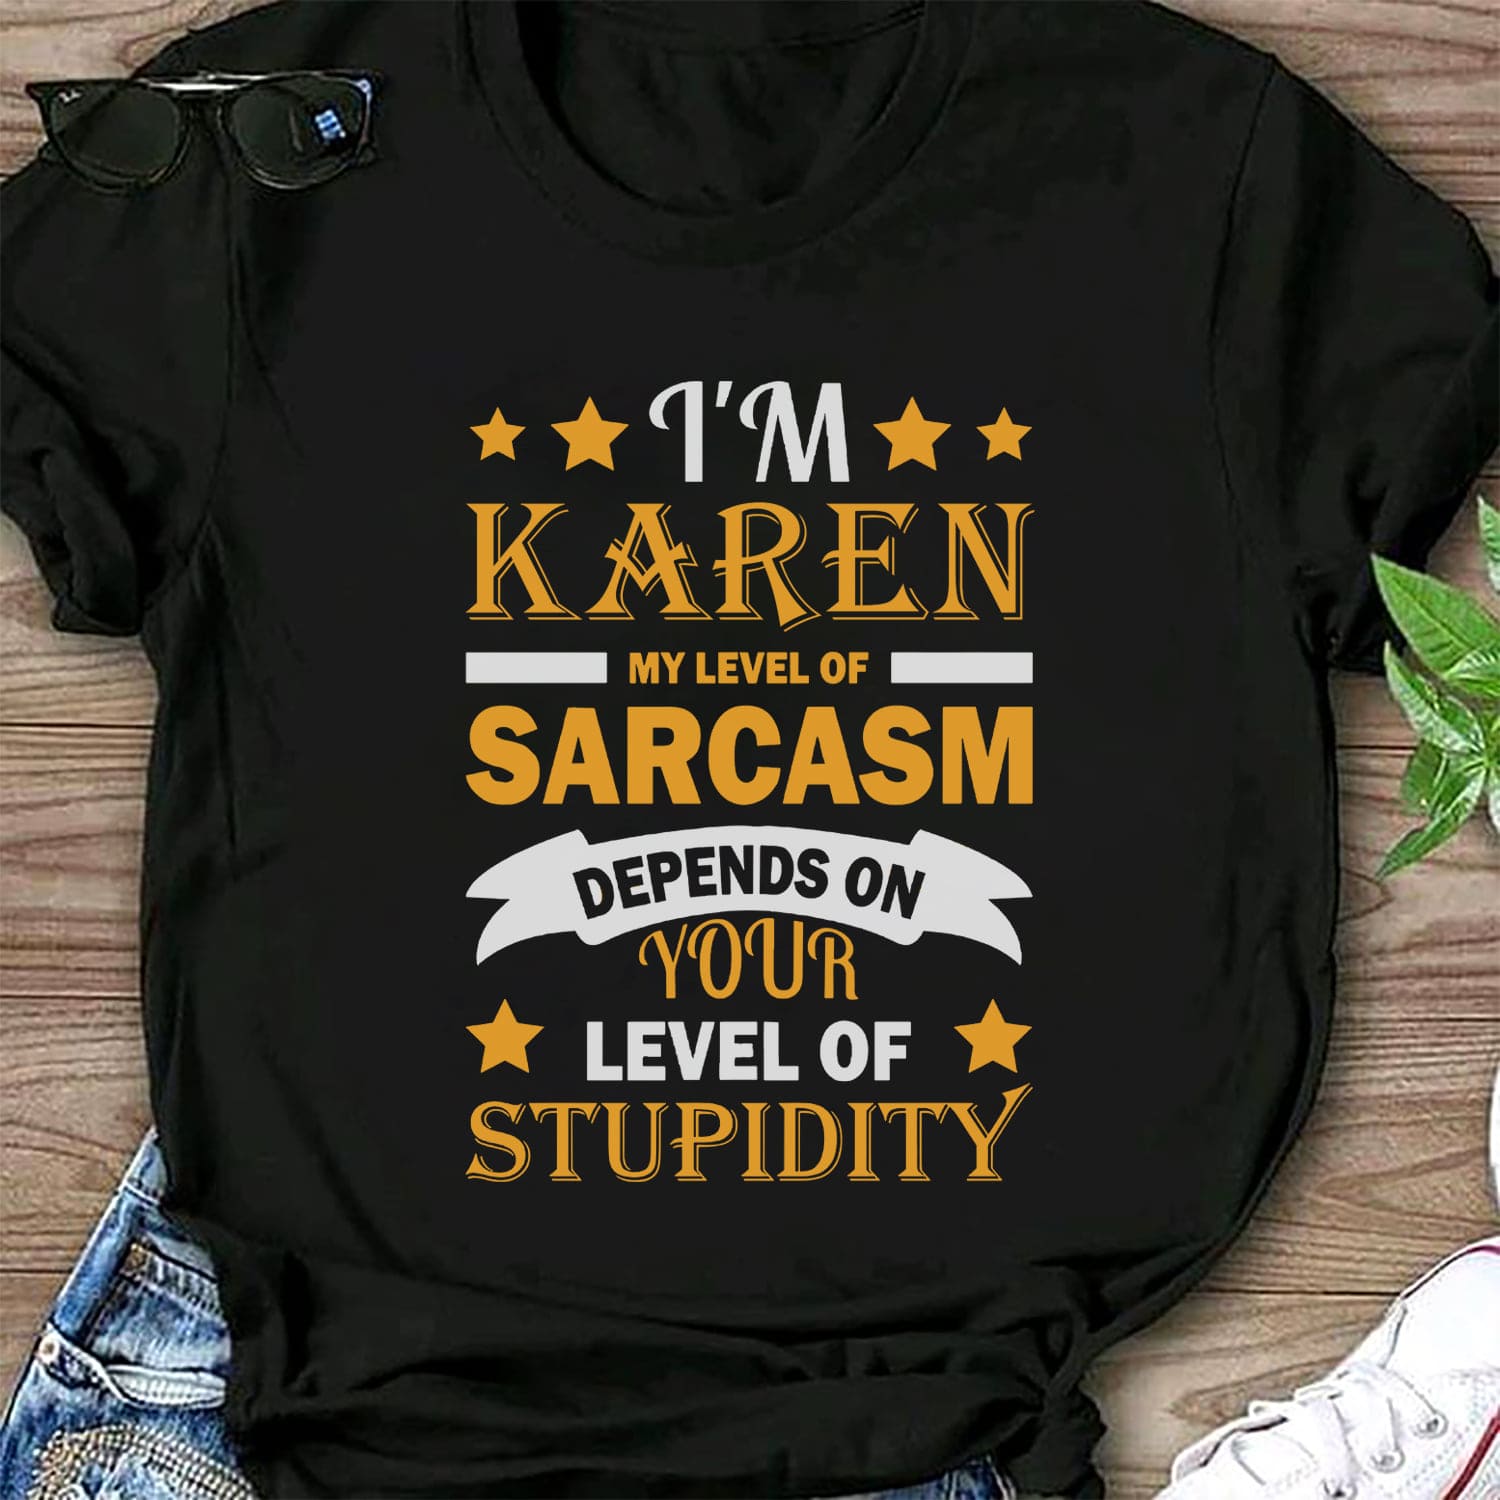 I'm Karen my level of sarcasm depends on your level of stupidity - T-shirt for Karen